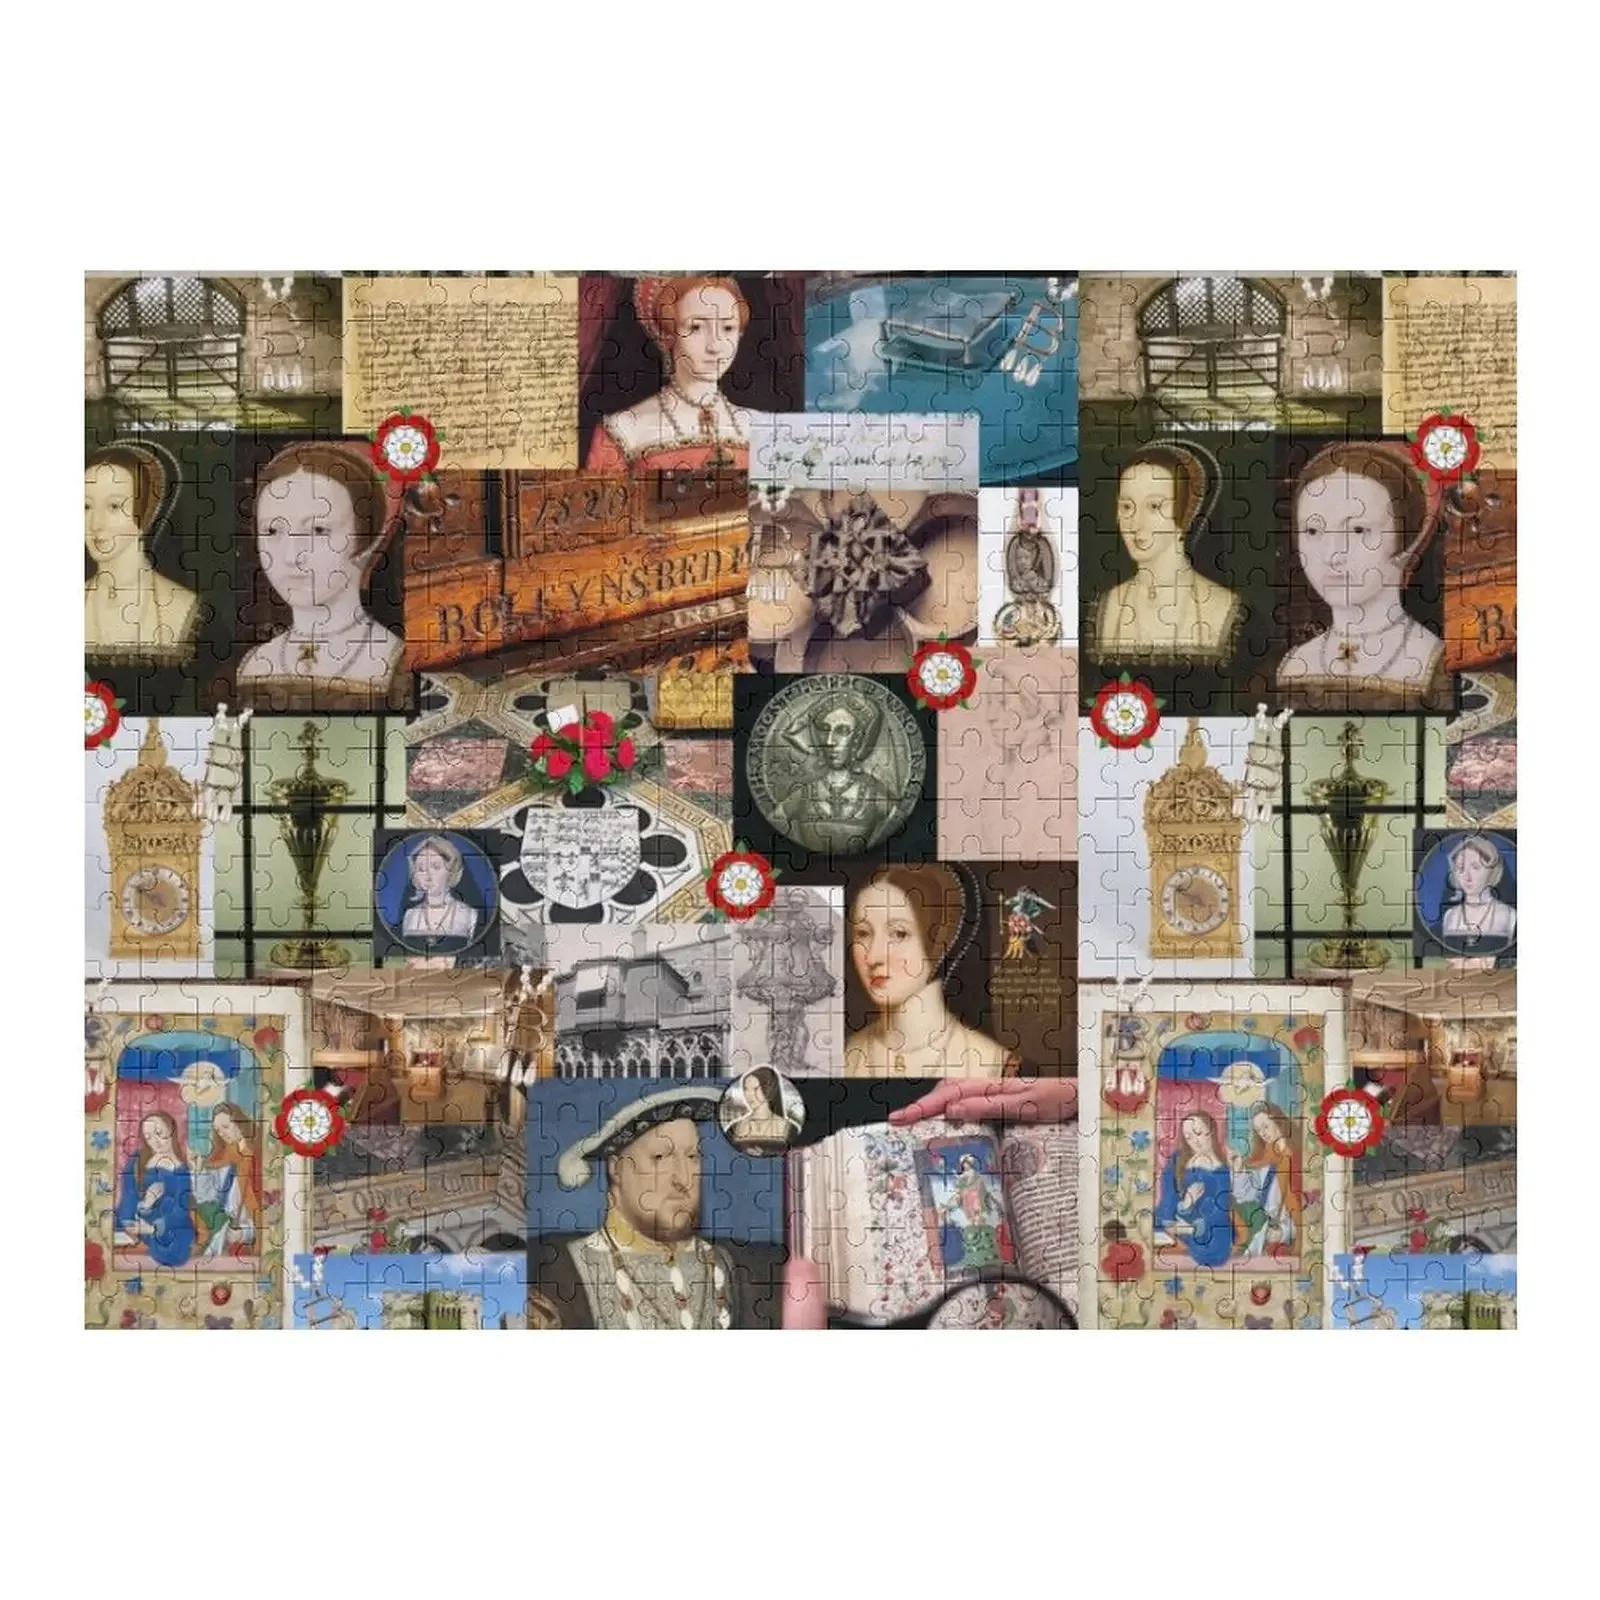 Anne Boleyn Collage Jigsaw Puzzle Woodens For Adults Wooden Decor Paintings Name Wooden Toy Puzzle six the musical queens portraits aragon boleyn seymour cleves howard parr jigsaw puzzle picture puzzle